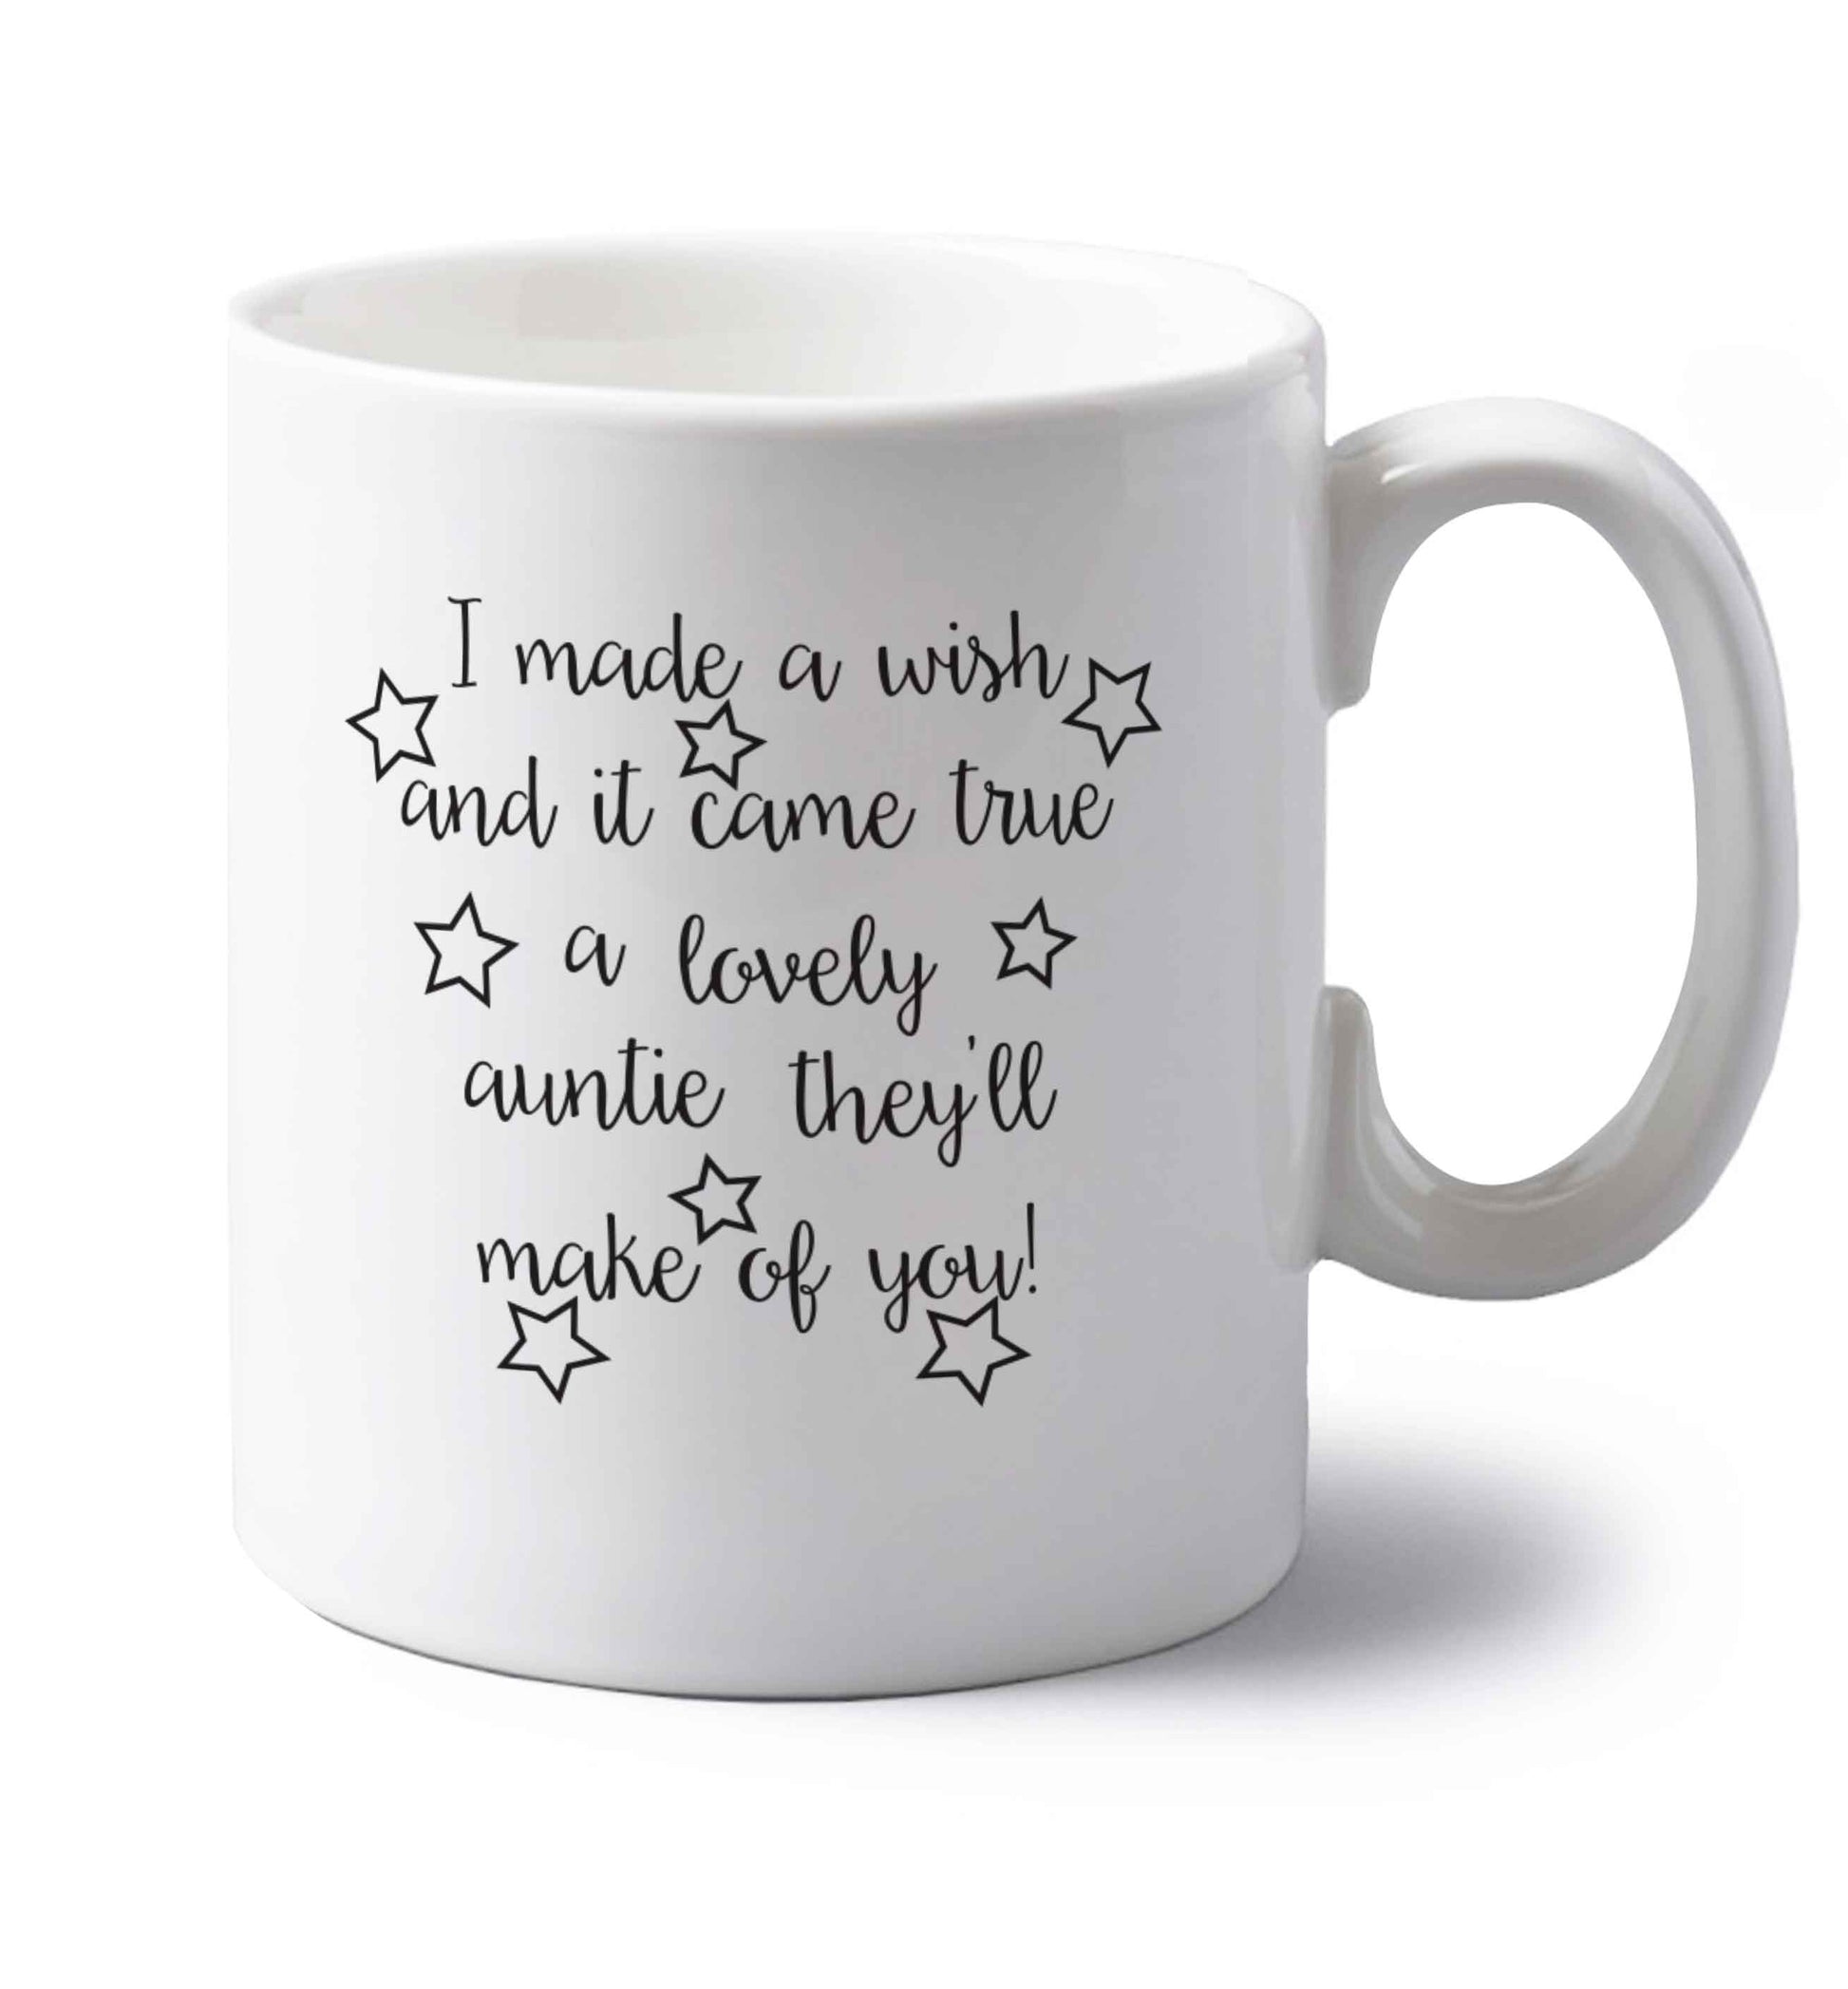 I made a wish and it came true a lovely auntie they'll make of you! left handed white ceramic mug 